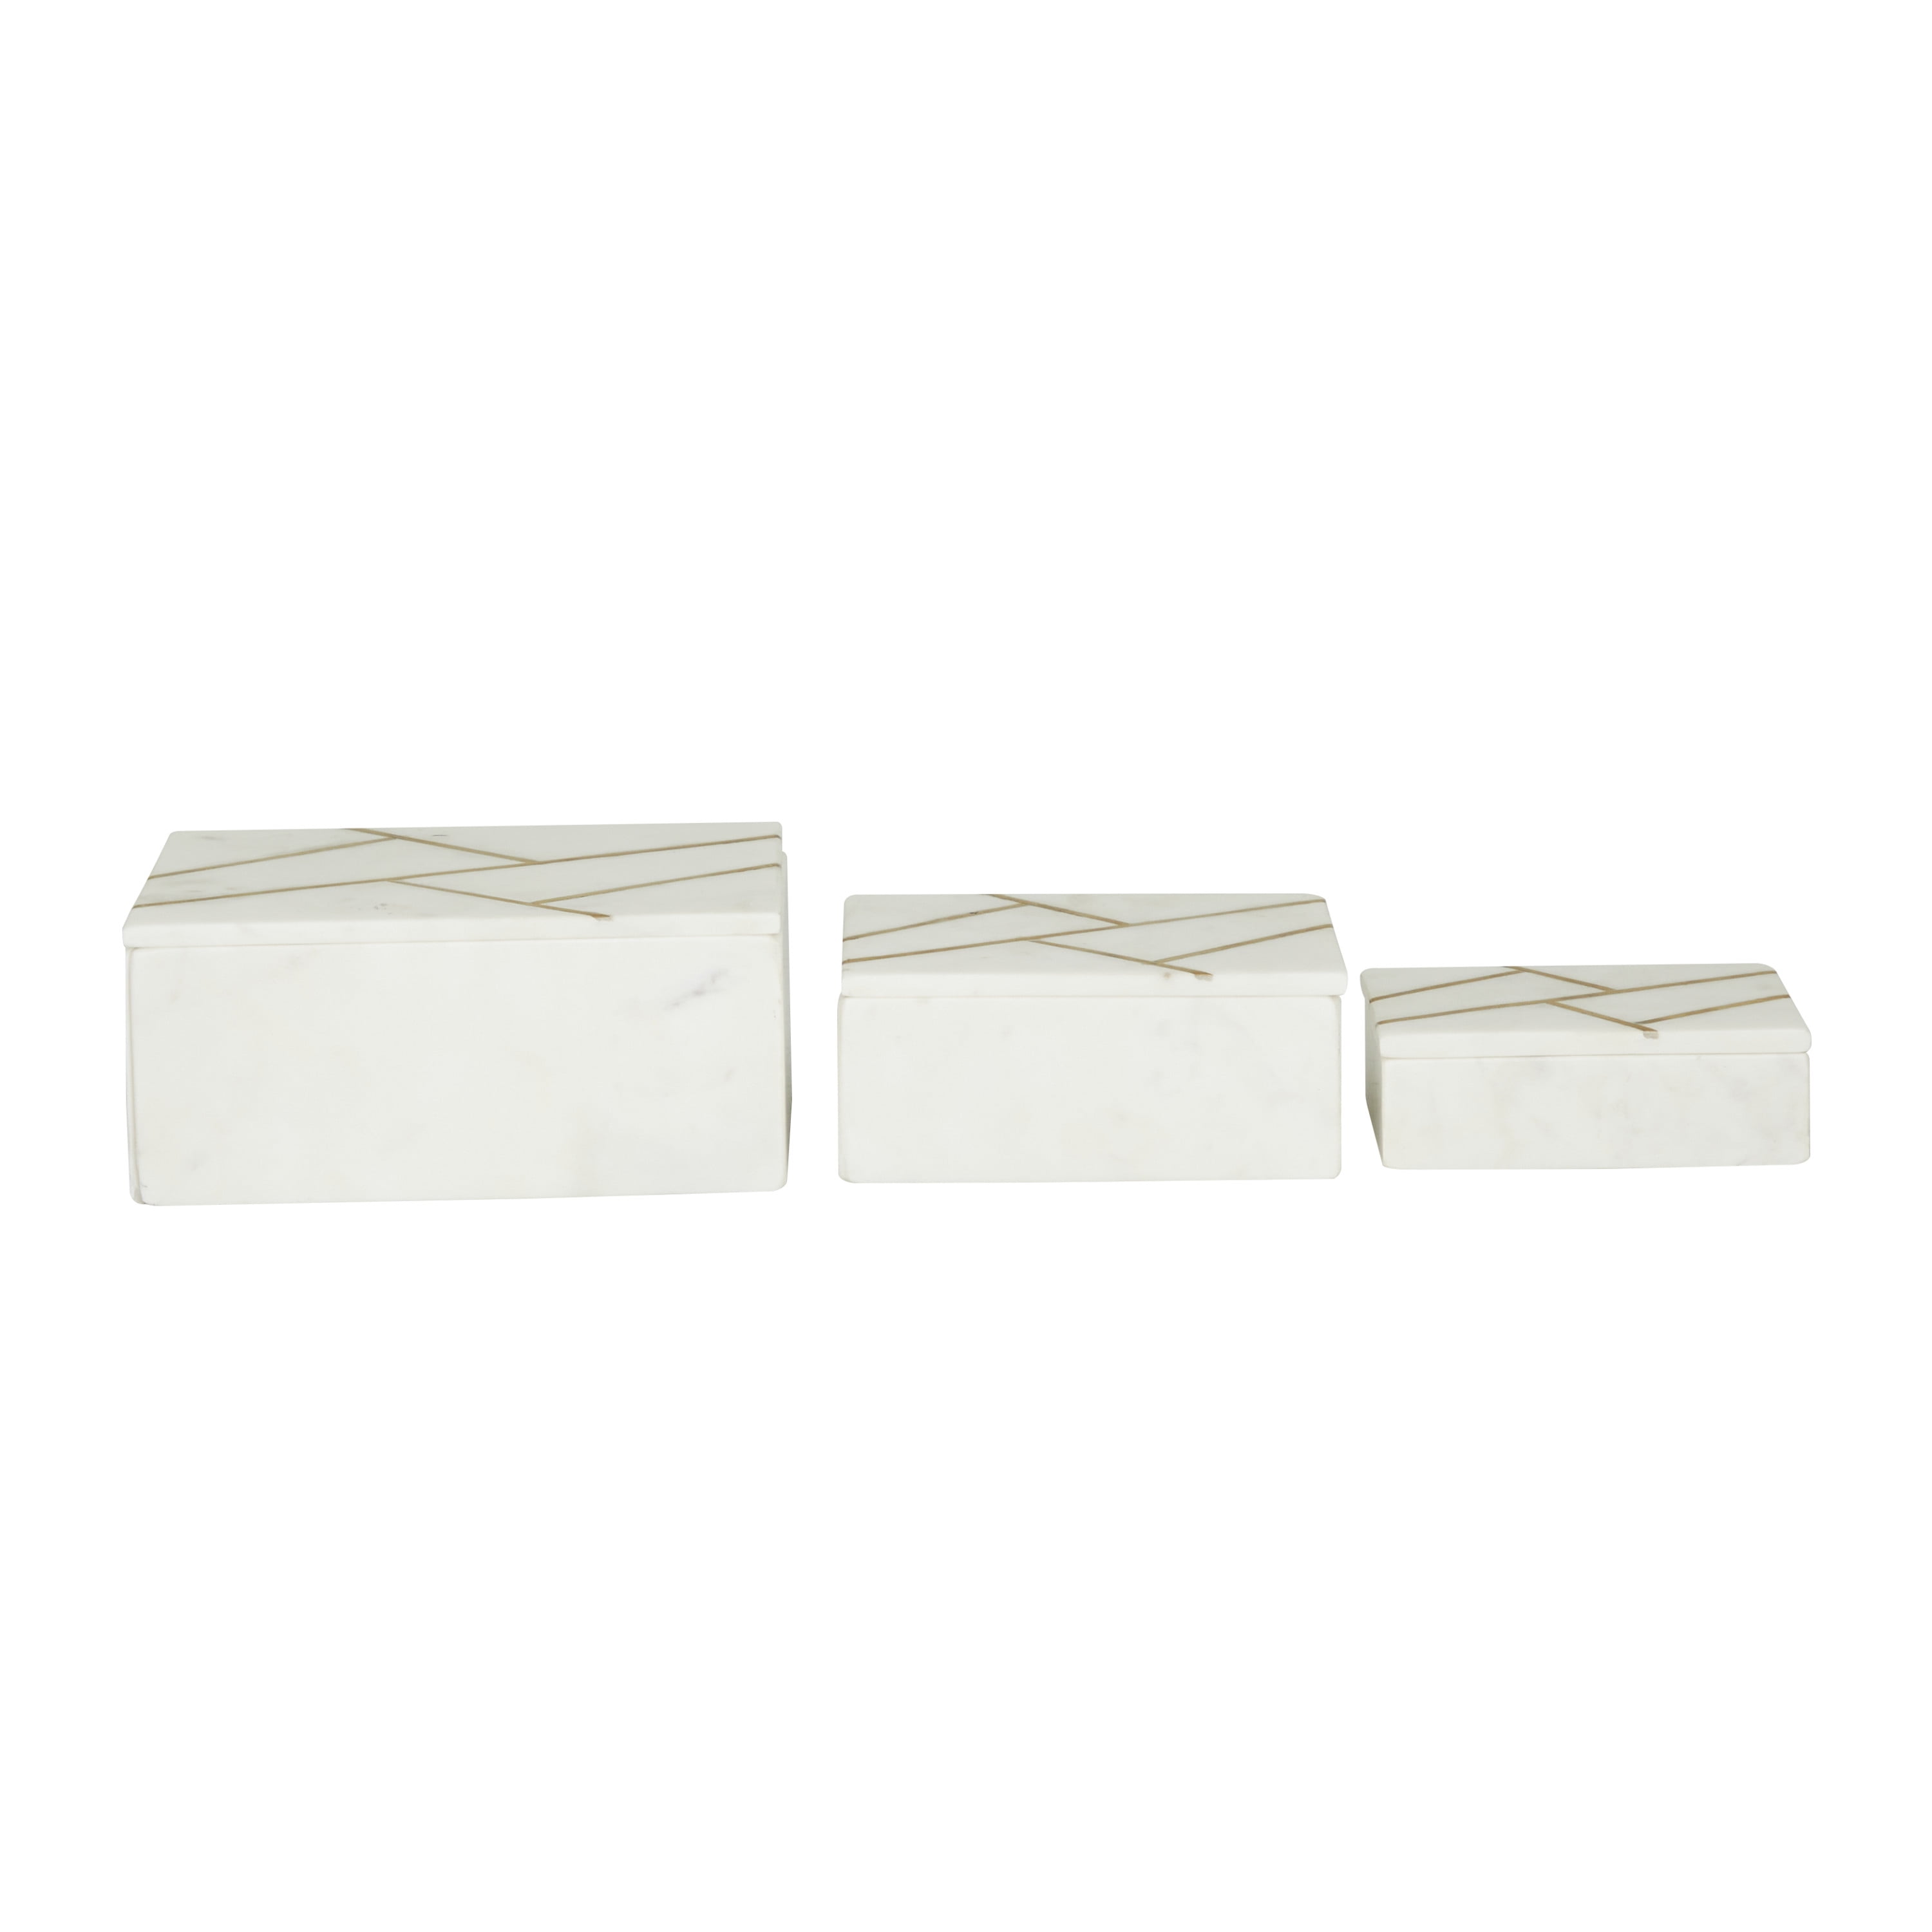  KhanImports Decorative White Marble Box, Stone Box with Lid -  Rectangular, 5 Inch : Home & Kitchen